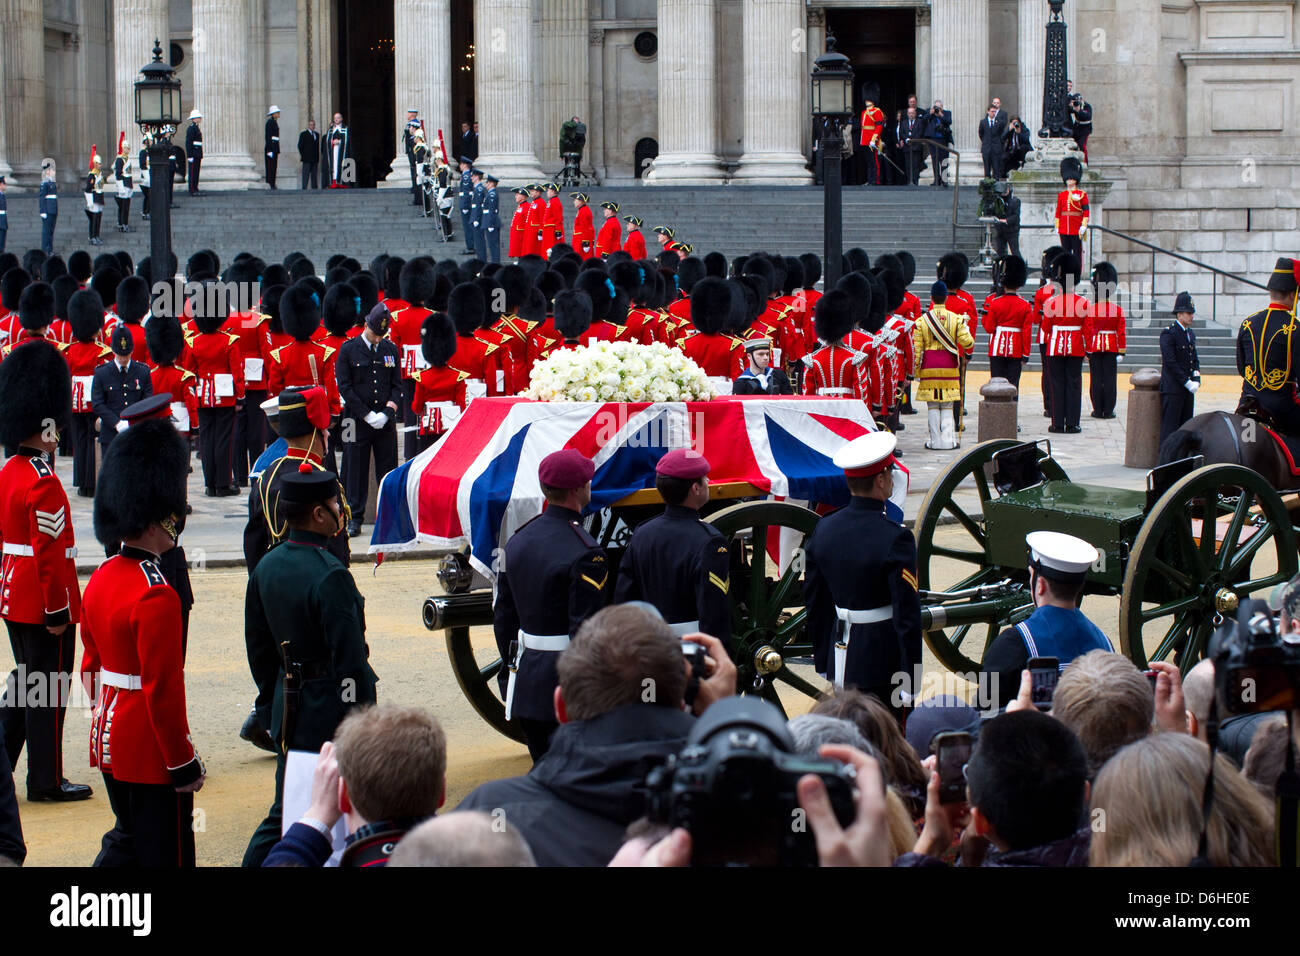 Funeral Of Margaret Thatcher at St Paul's Cathedral April 17th 2013 Stock Photo